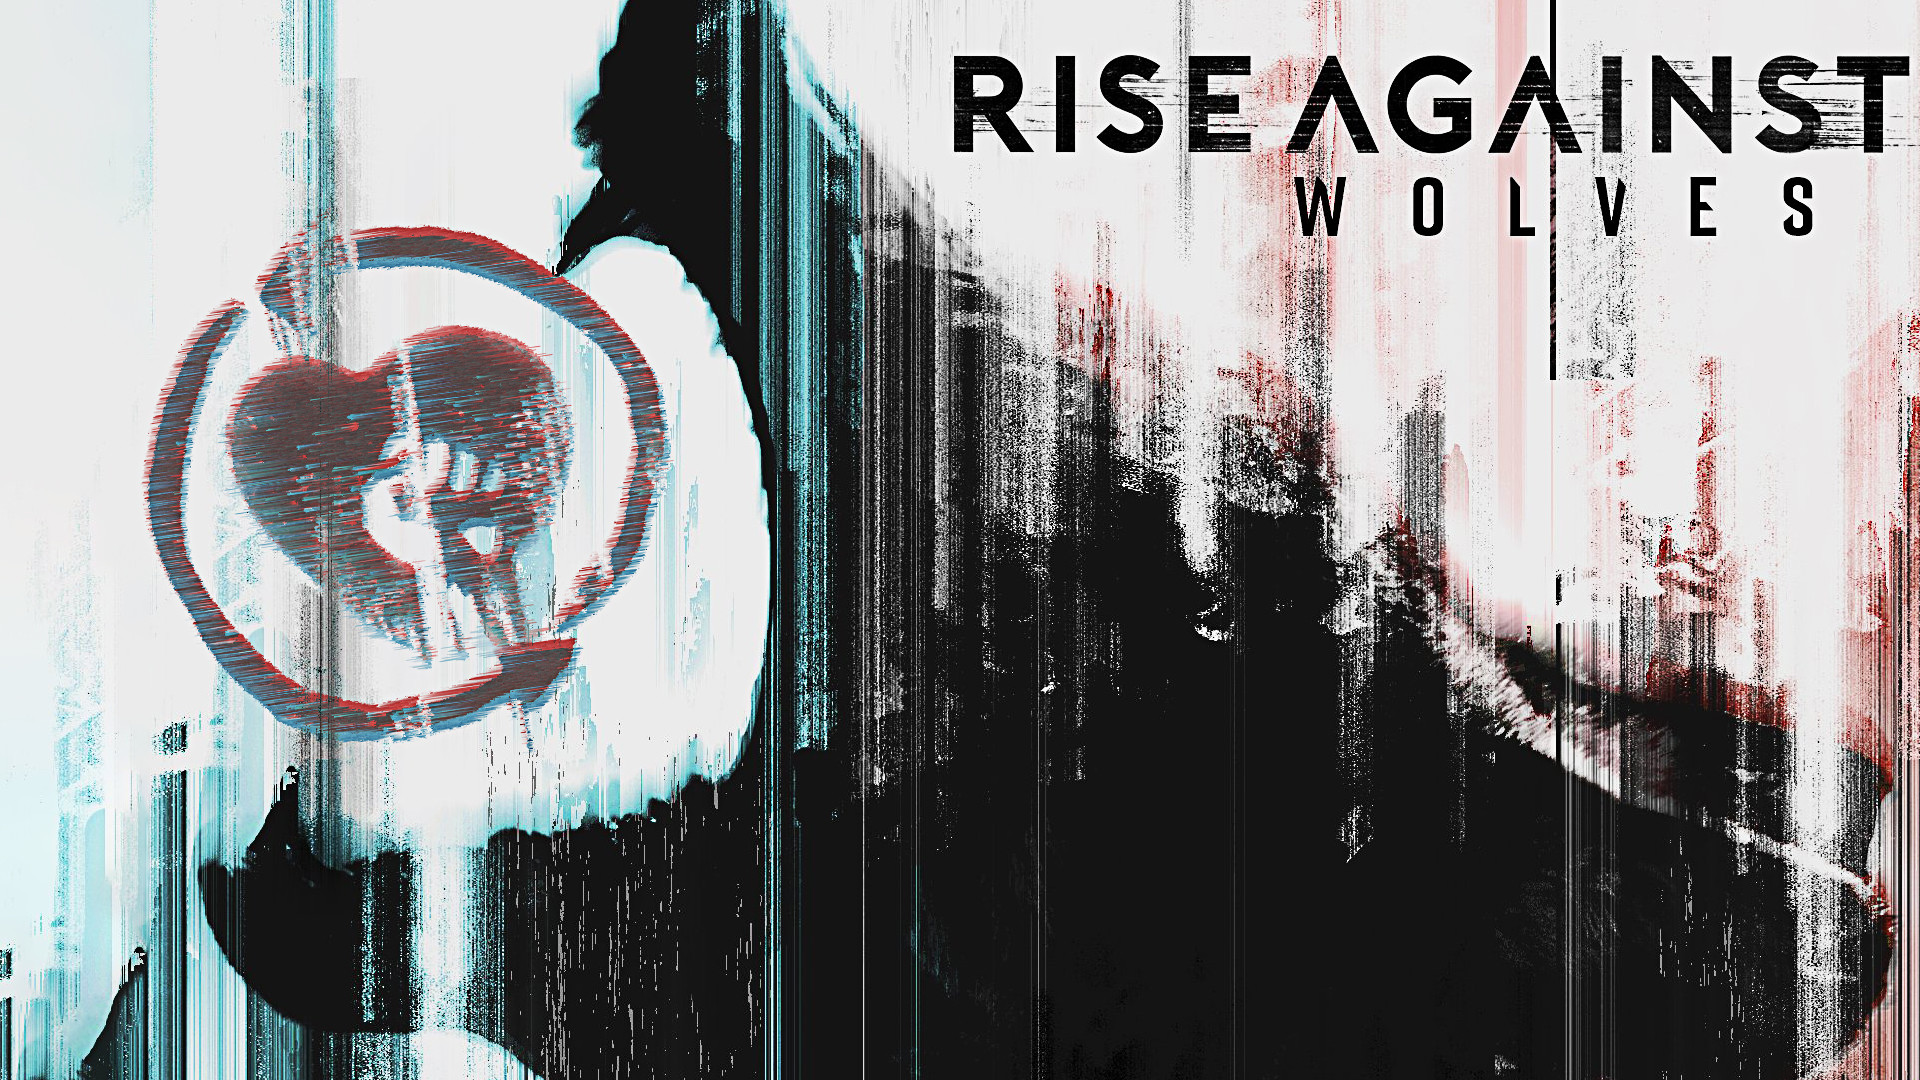 1920x1080 ... Rise Against, Wolves Wallpaper by Buzzern